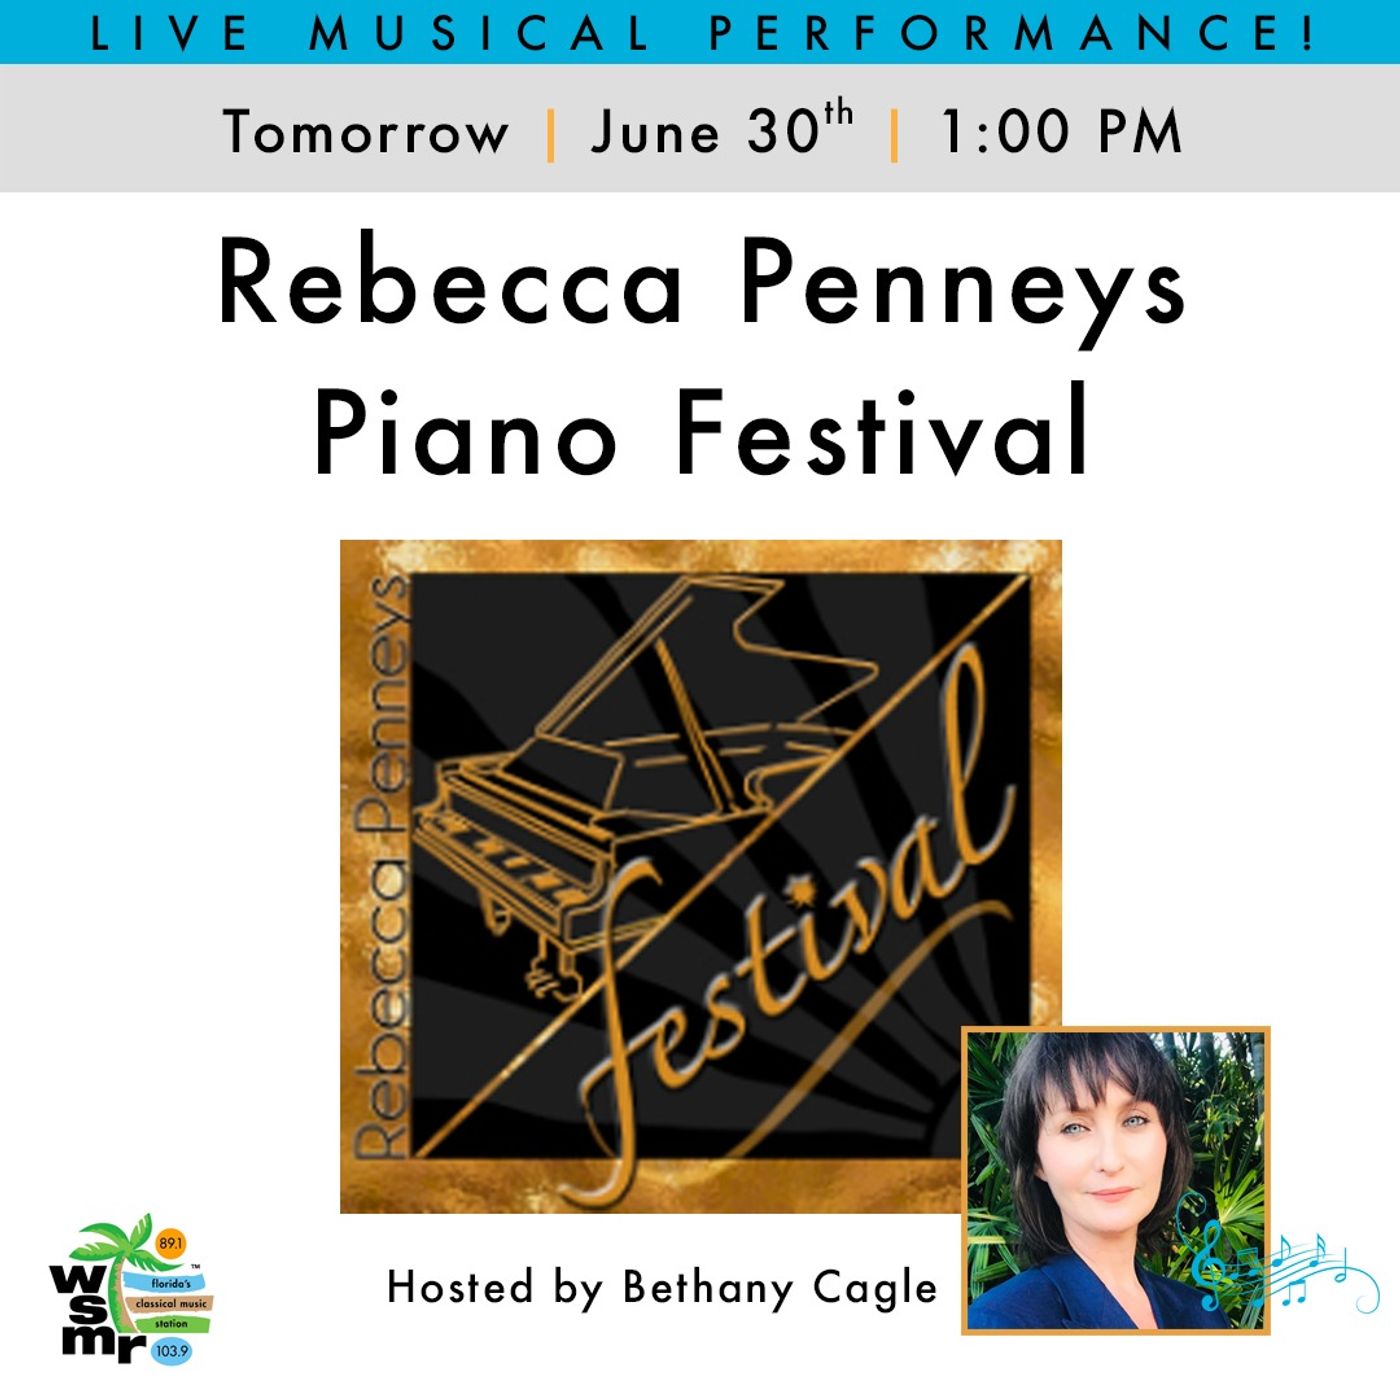 Live Performance – Pianists from the Rebecca Penneys Piano Festival – June 30th, 2022